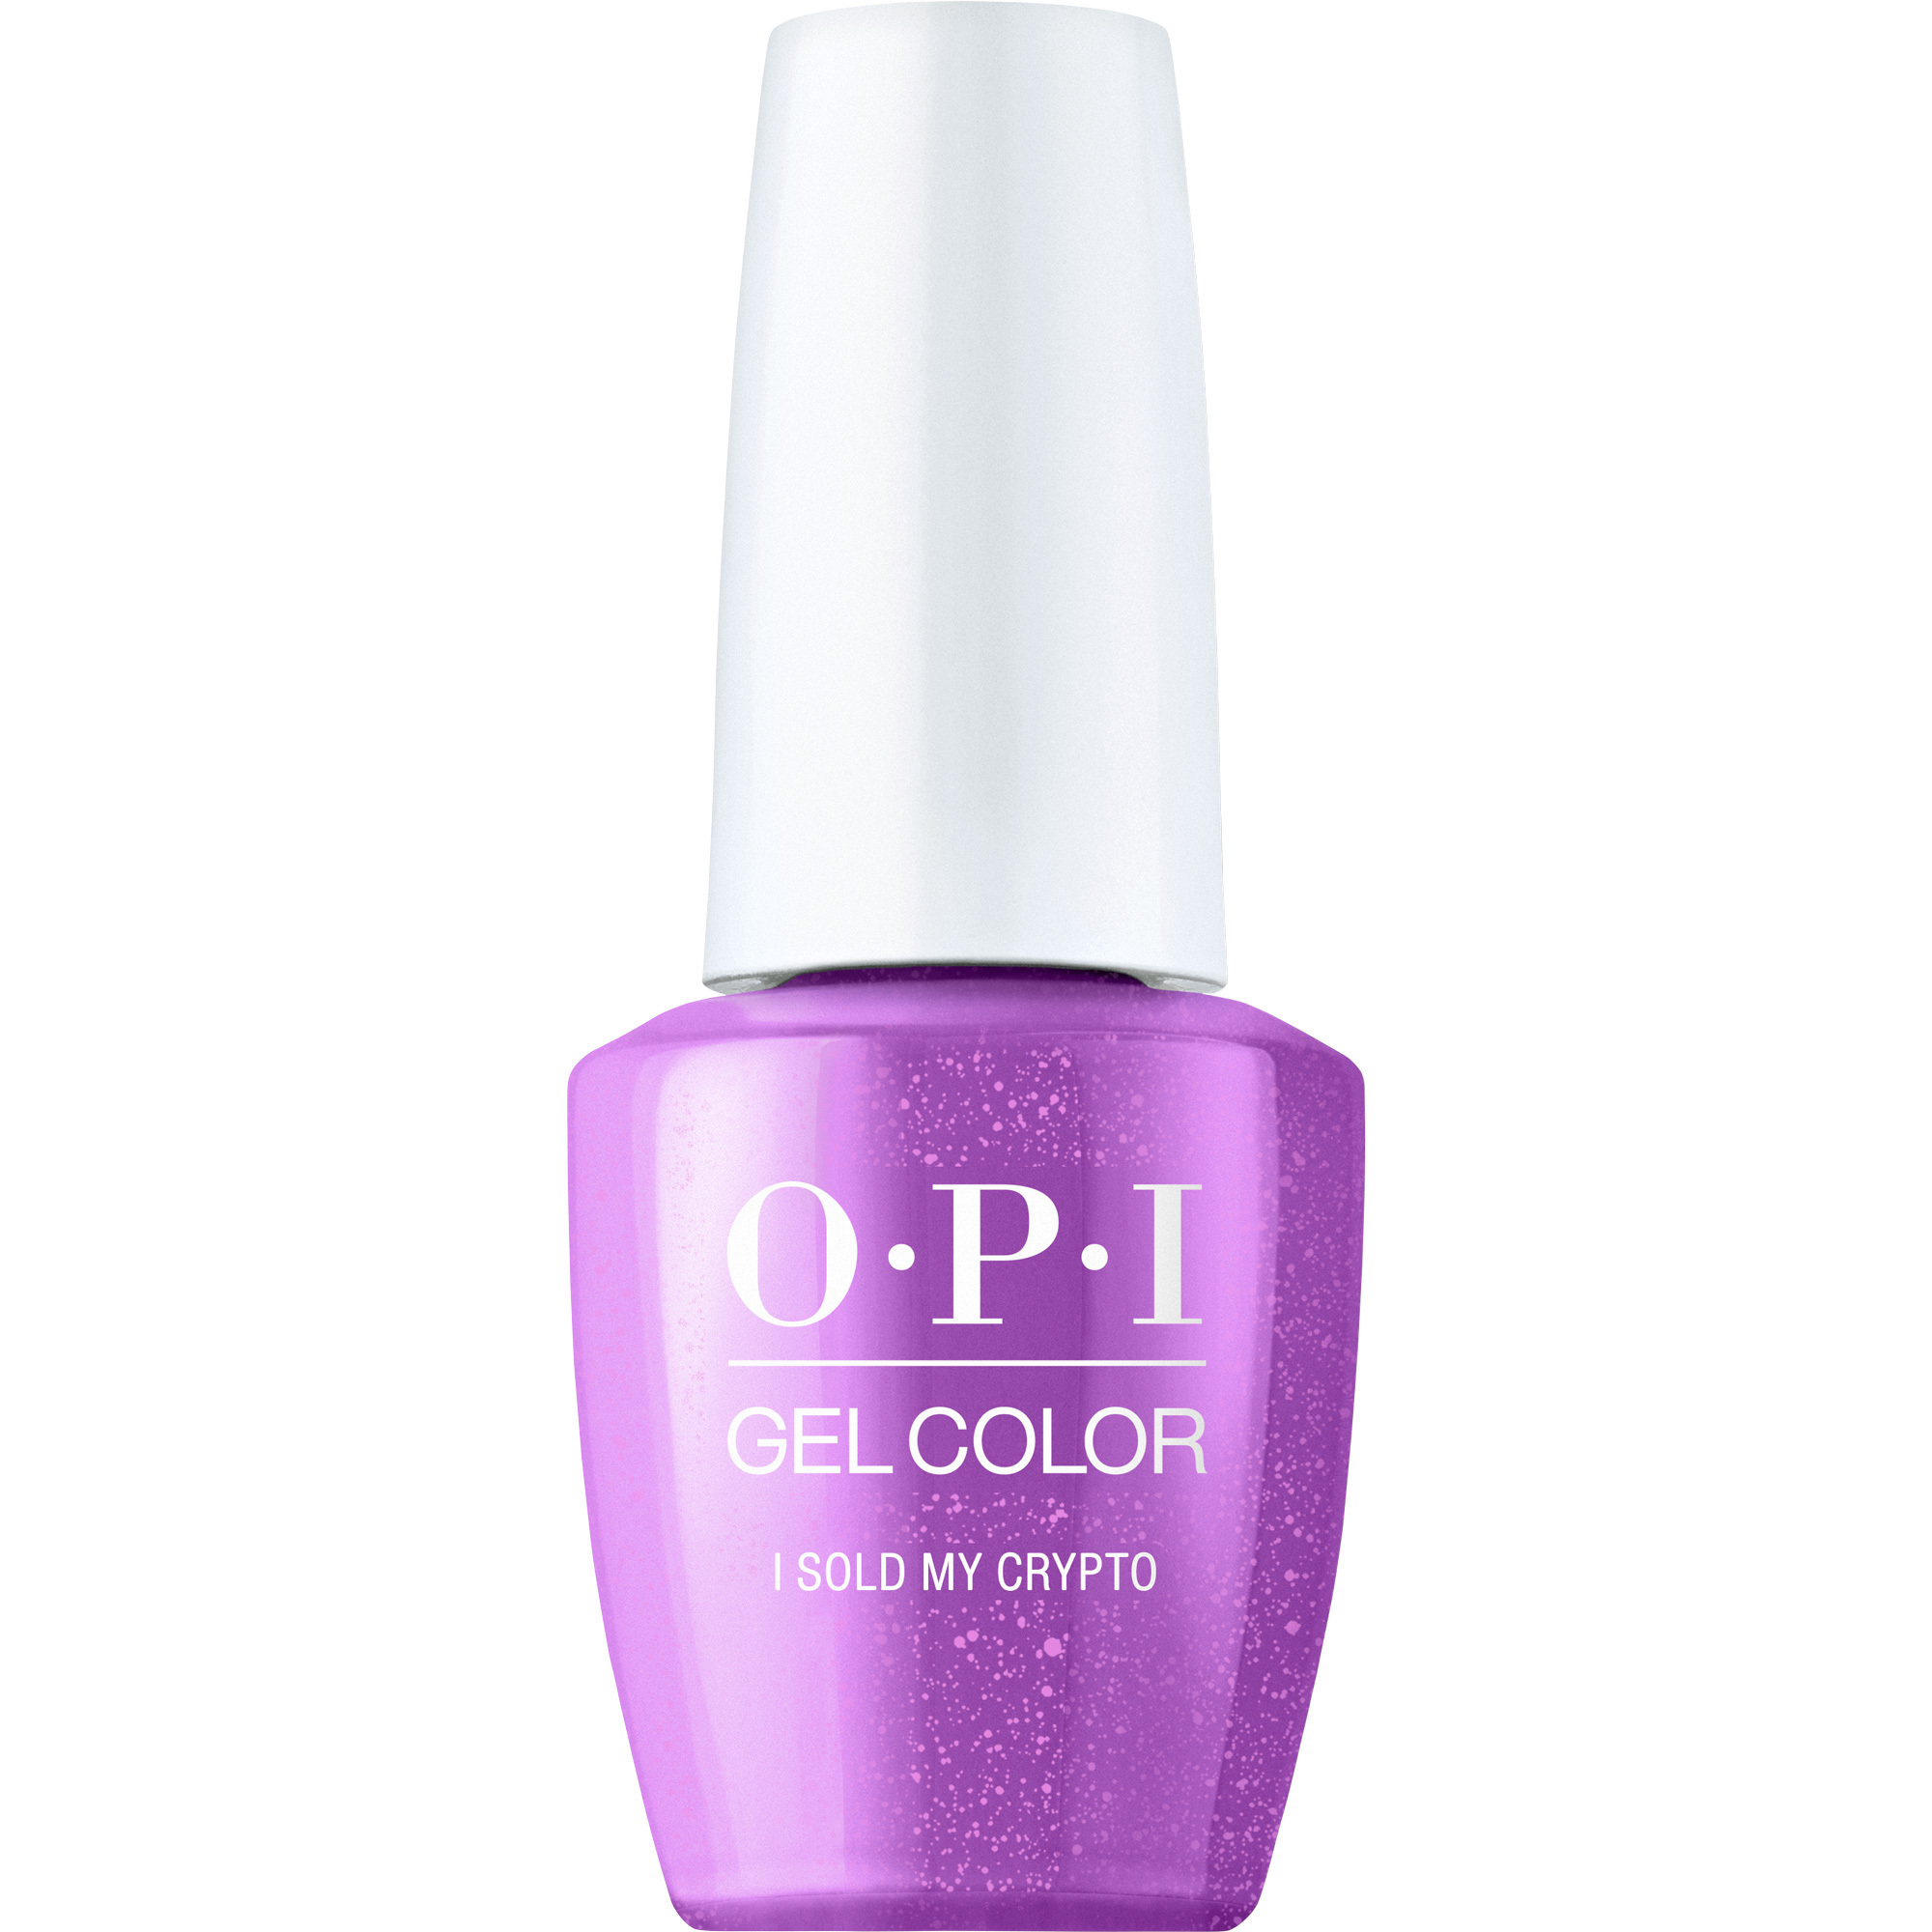 OPI Gel Color 360 - I Sold My Crypto